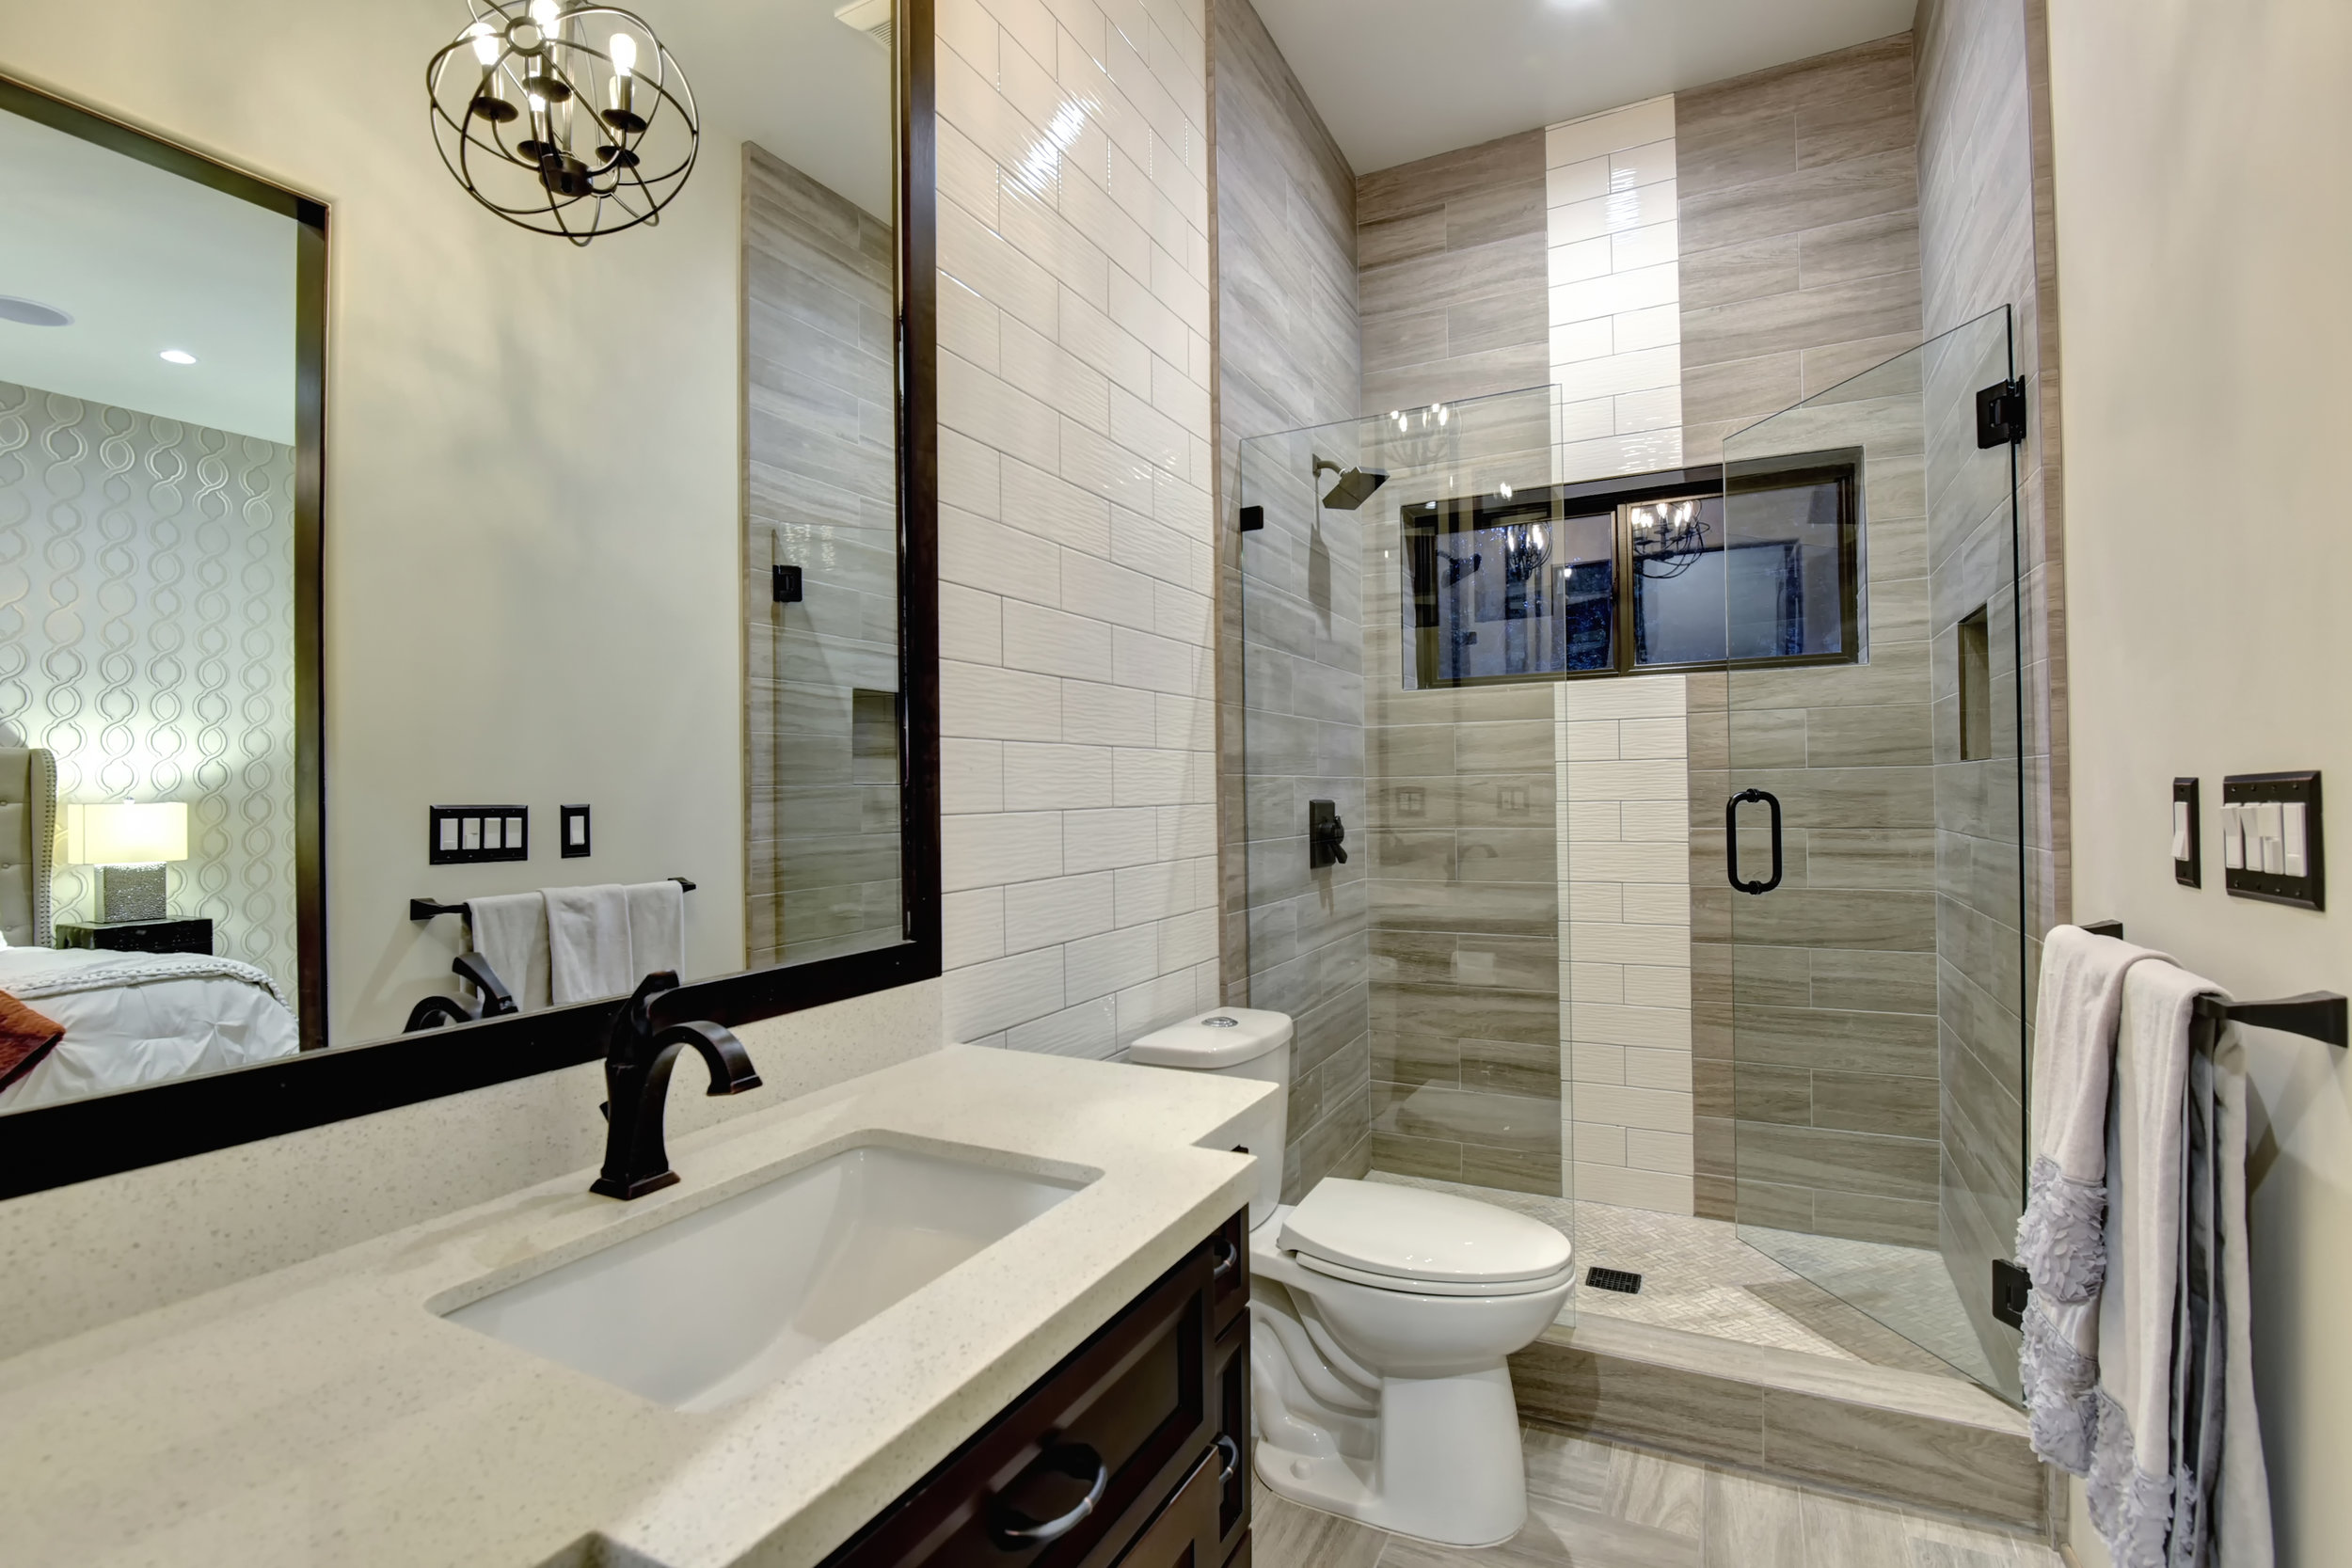  All of the bathrooms have custom vanities, quartz stone counters, and tile showers 